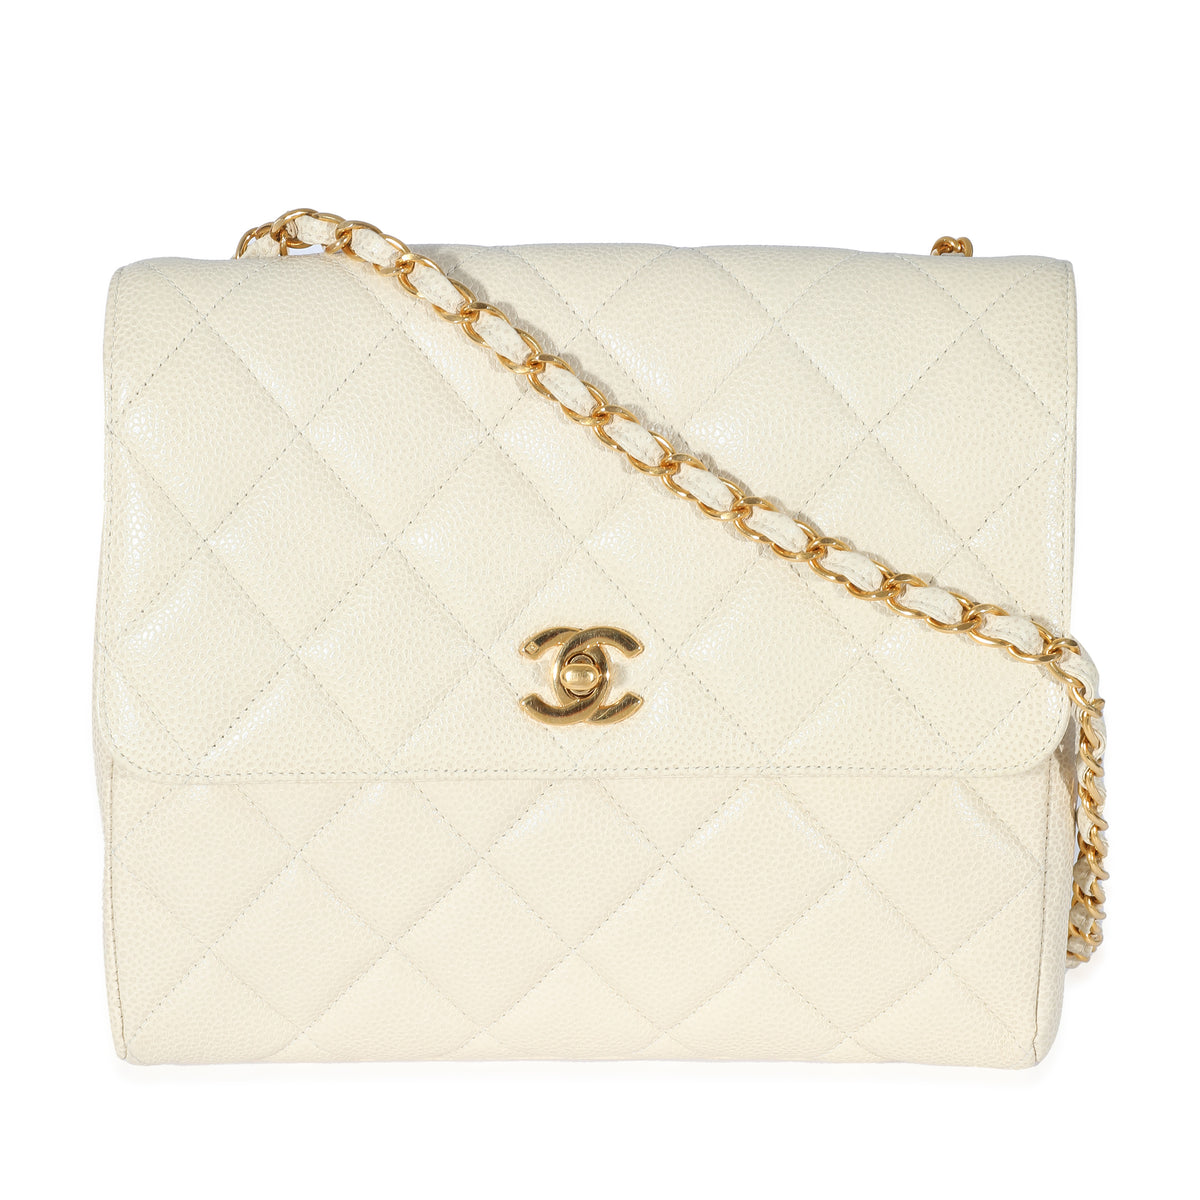 Chanel Pink Quilted Caviar Micro Vanity Case Pale Gold Hardware, 2022 (Like New), Womens Handbag